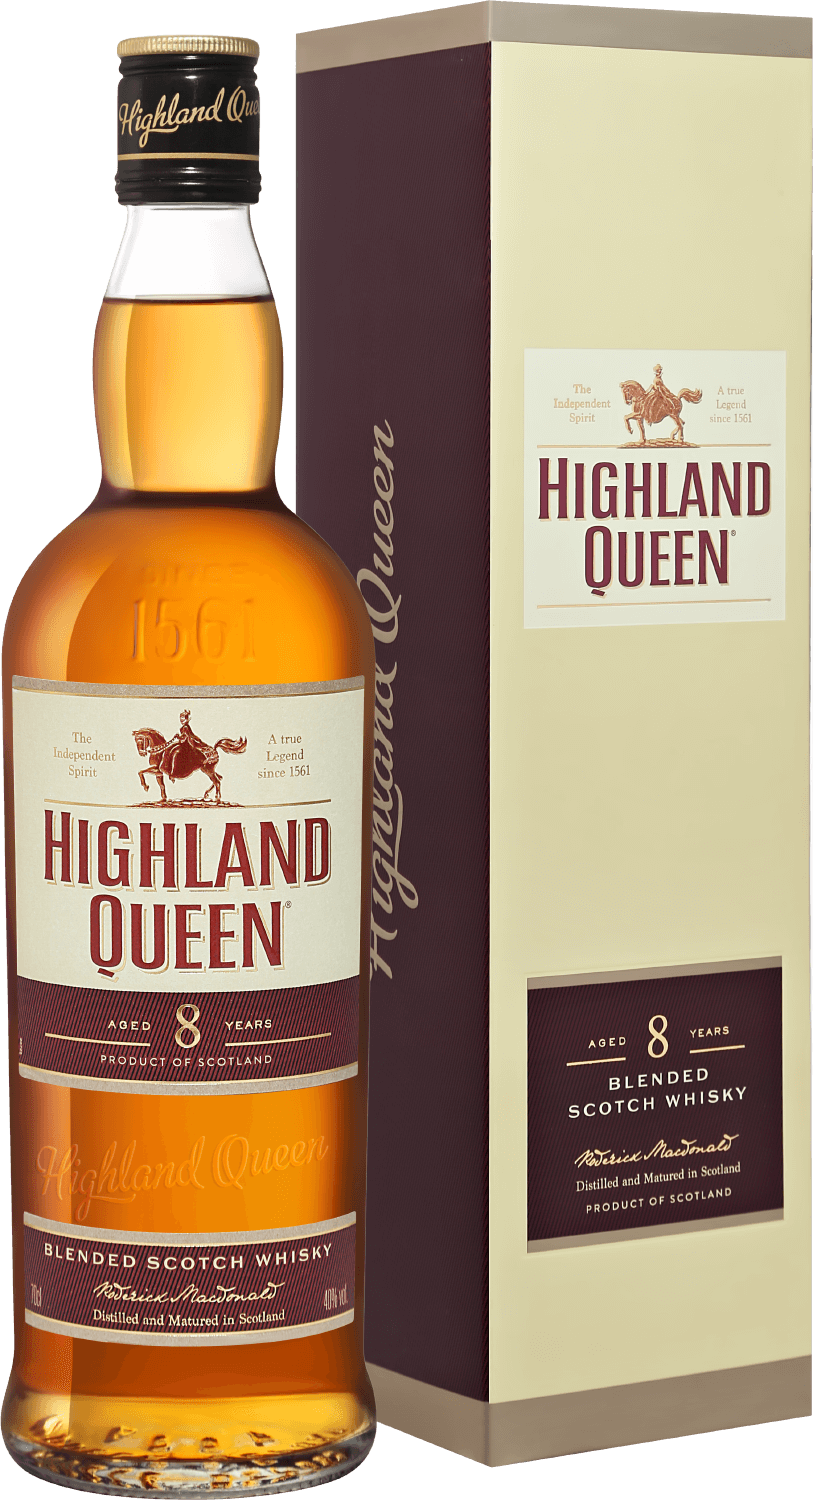 Highland Queen Blended Scotch Whisky 8 y.o. (gift box)